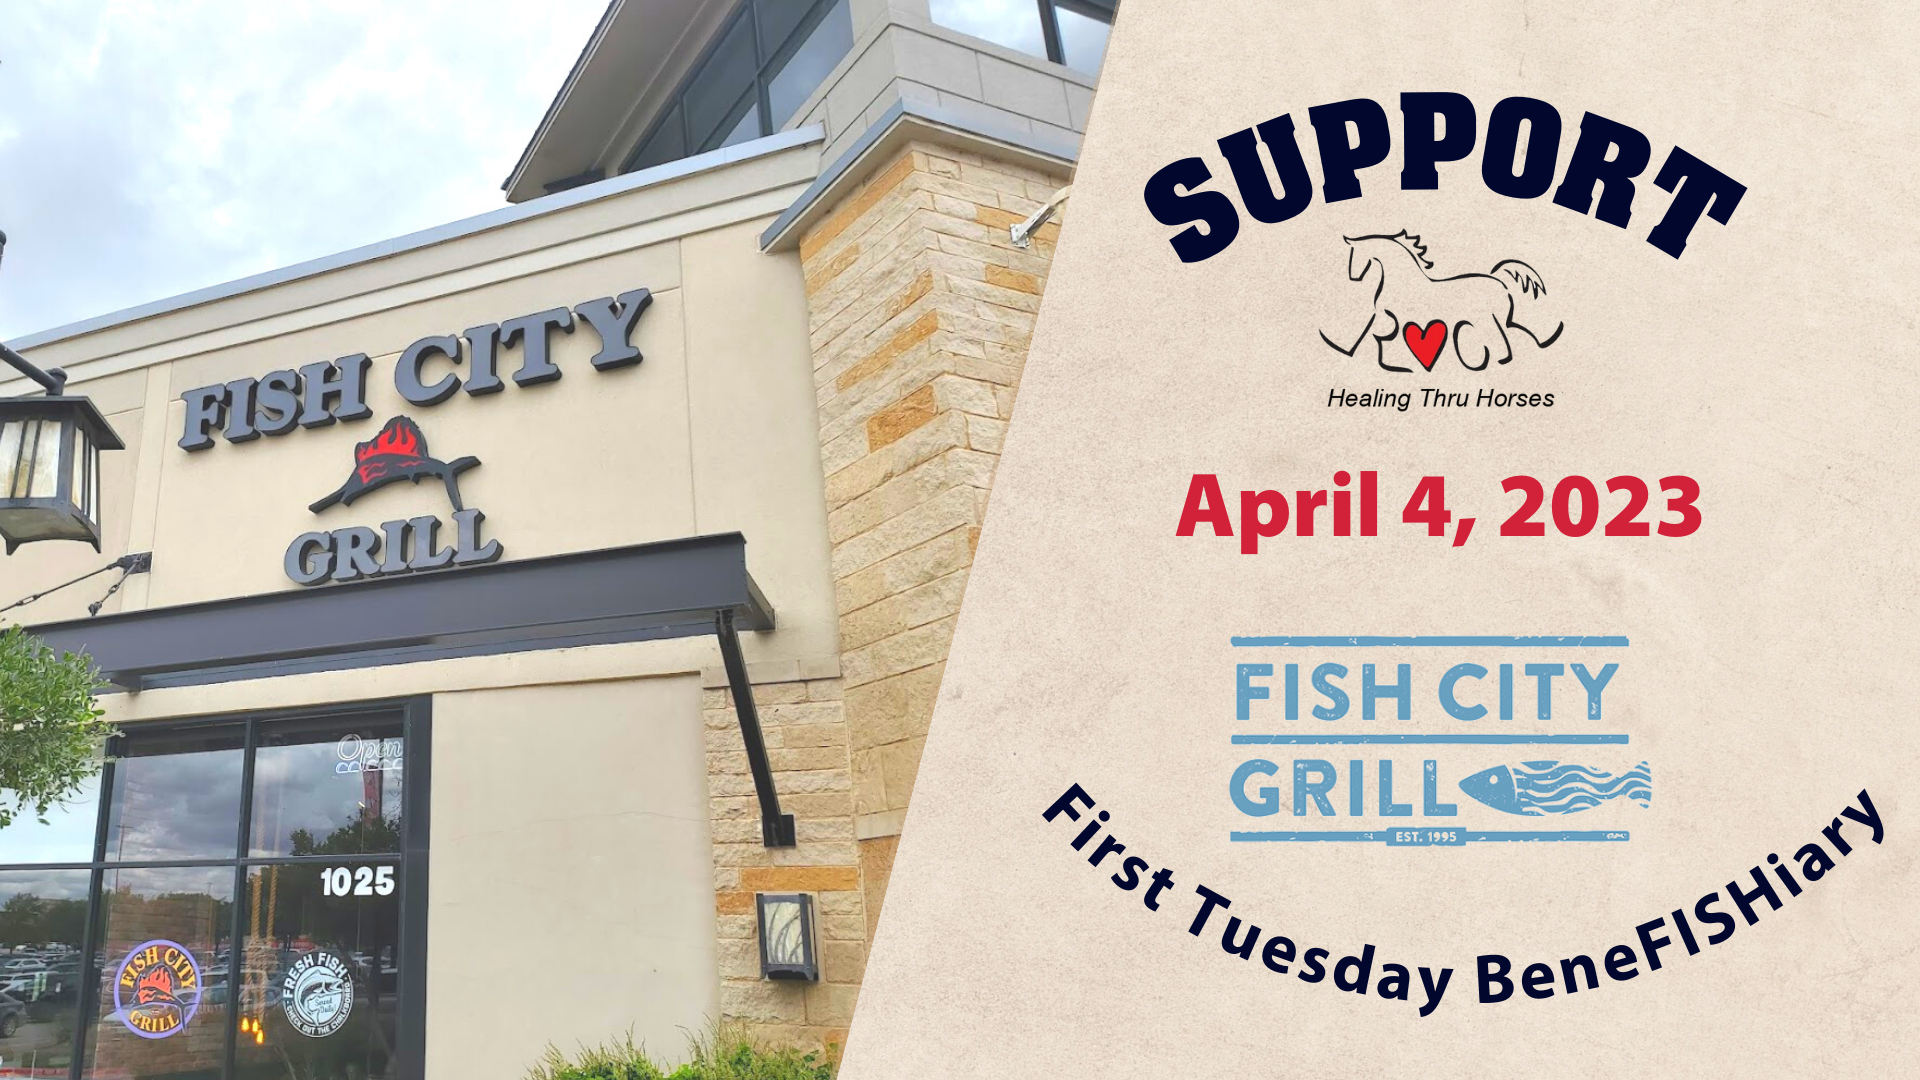 Fish City Grill First Tuesday April 4, 2023